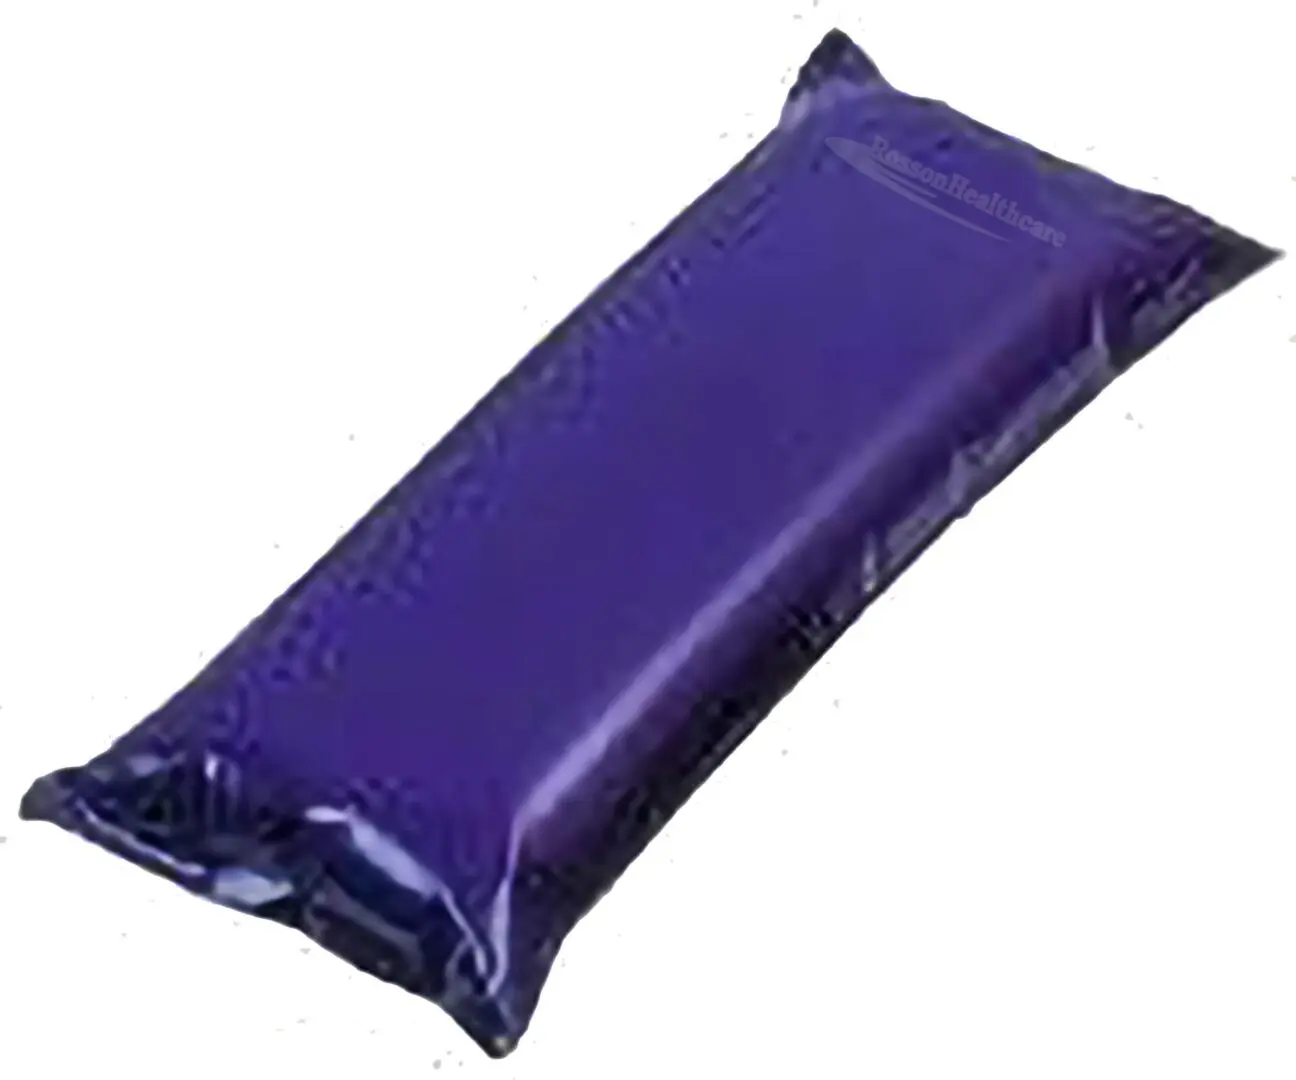 A purple bag of chocolate candy.